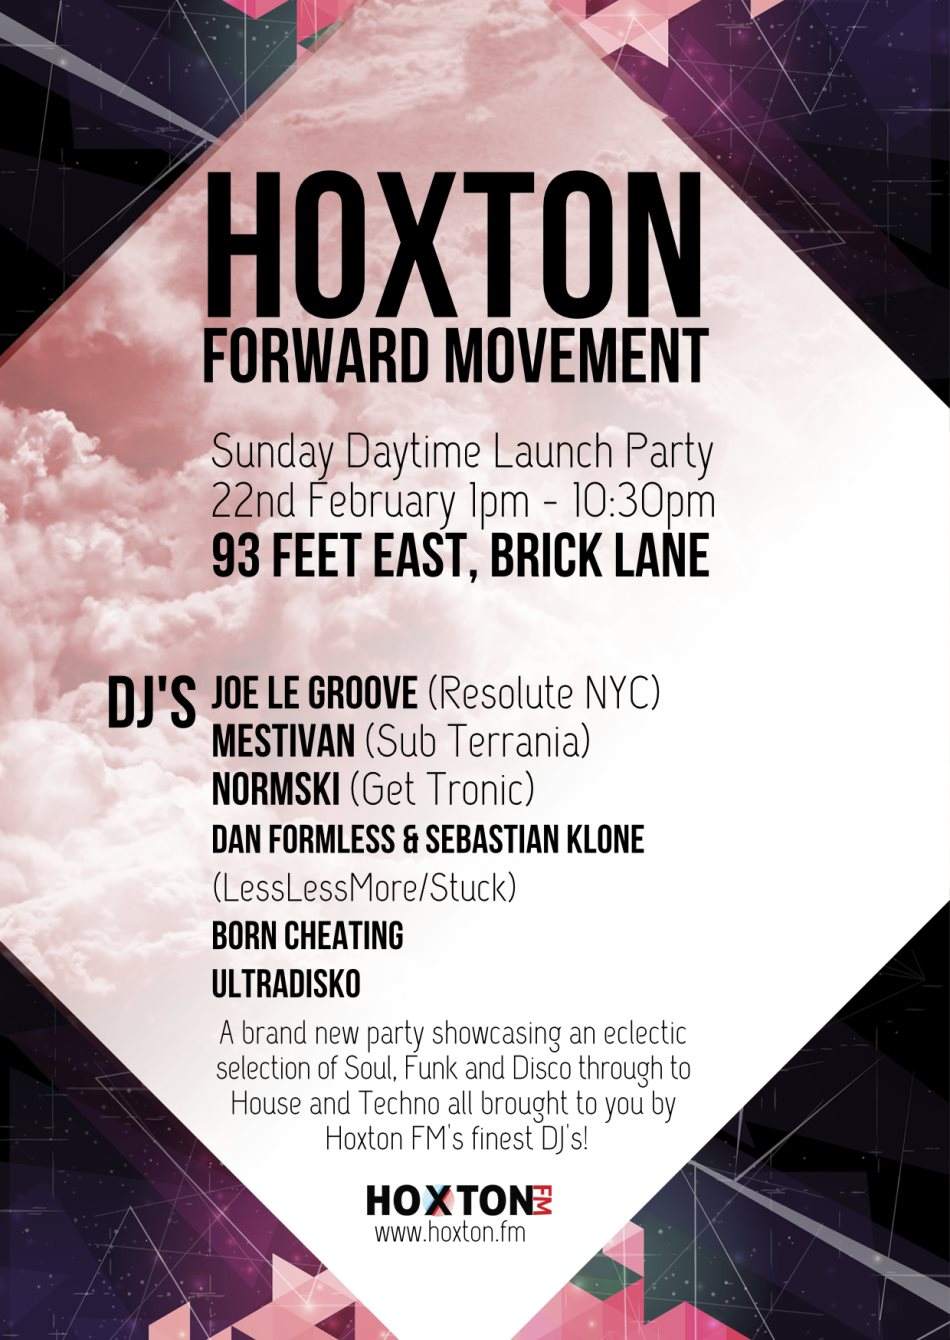 Hoxton Forward Movement Daytime Launch Party - Flyer front